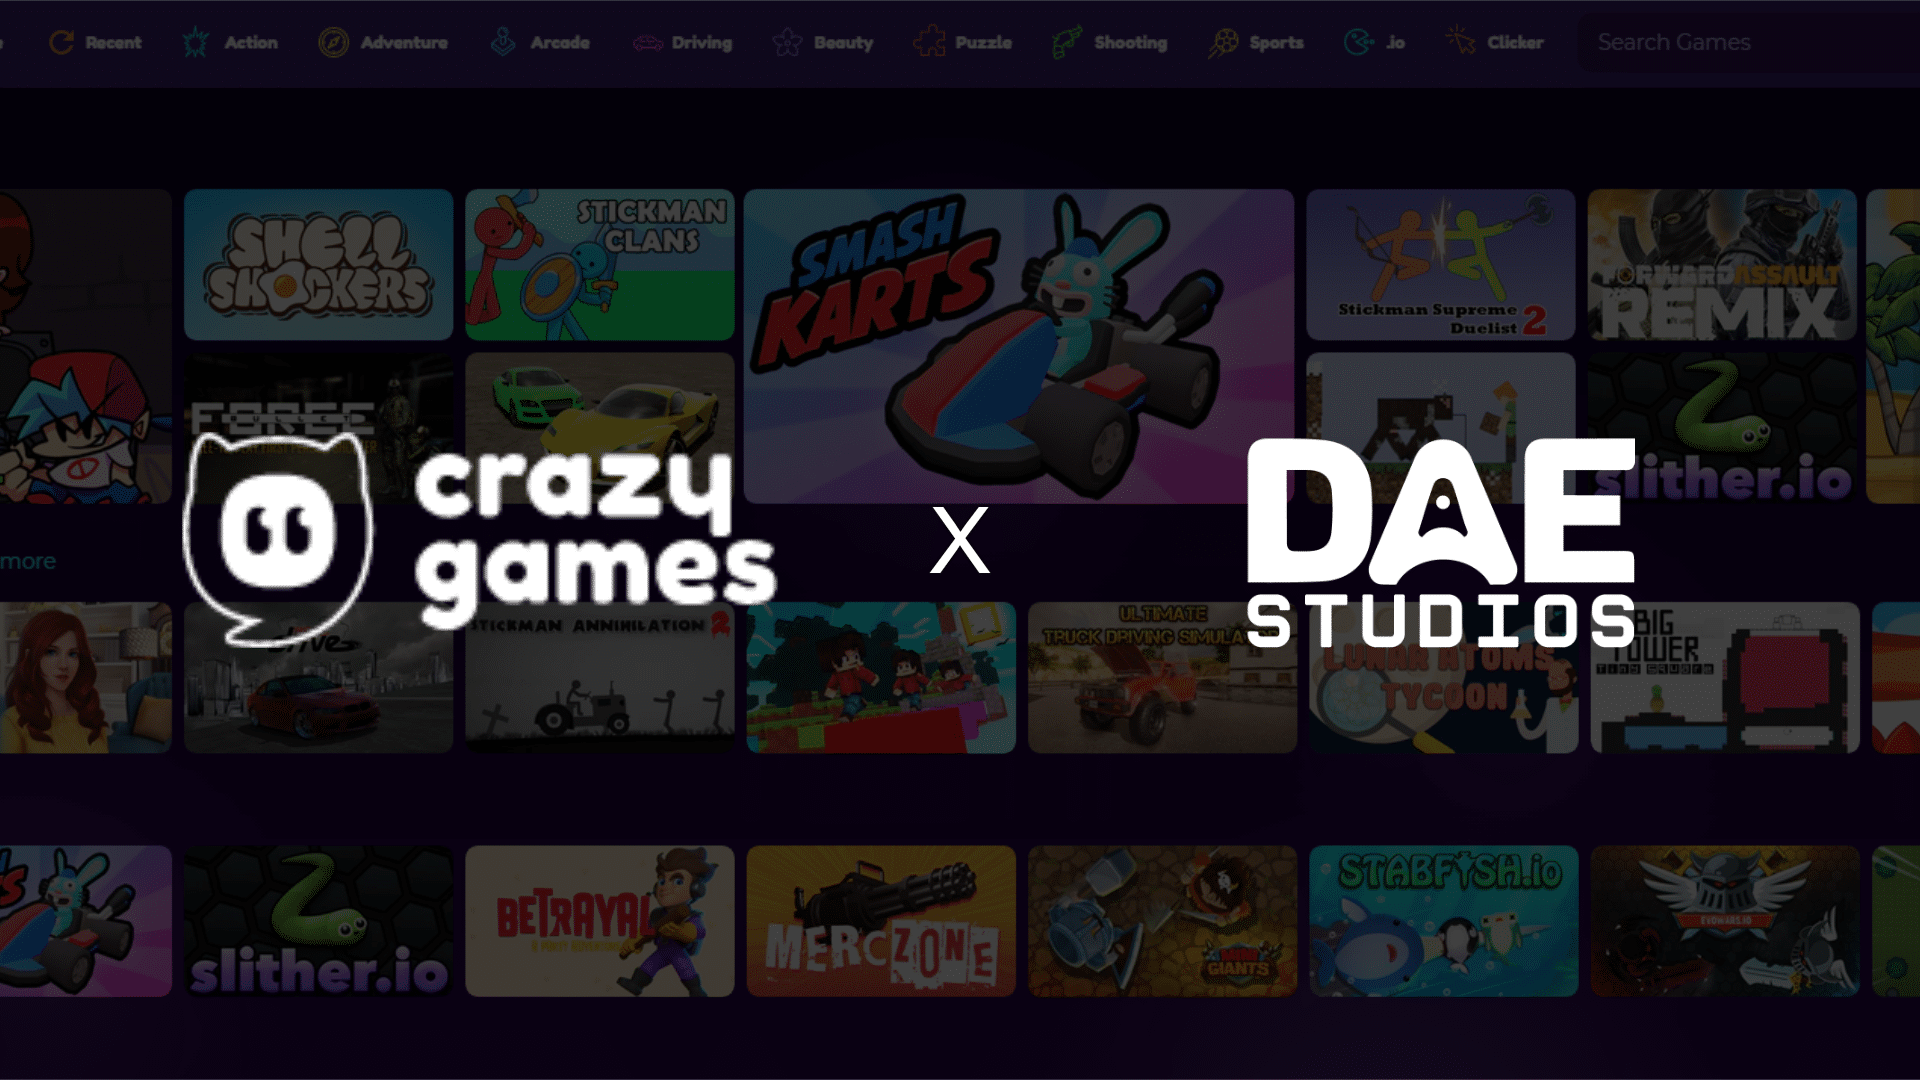 DAE Studios - Crazygames and DAE Studios join forces to create fun webgames